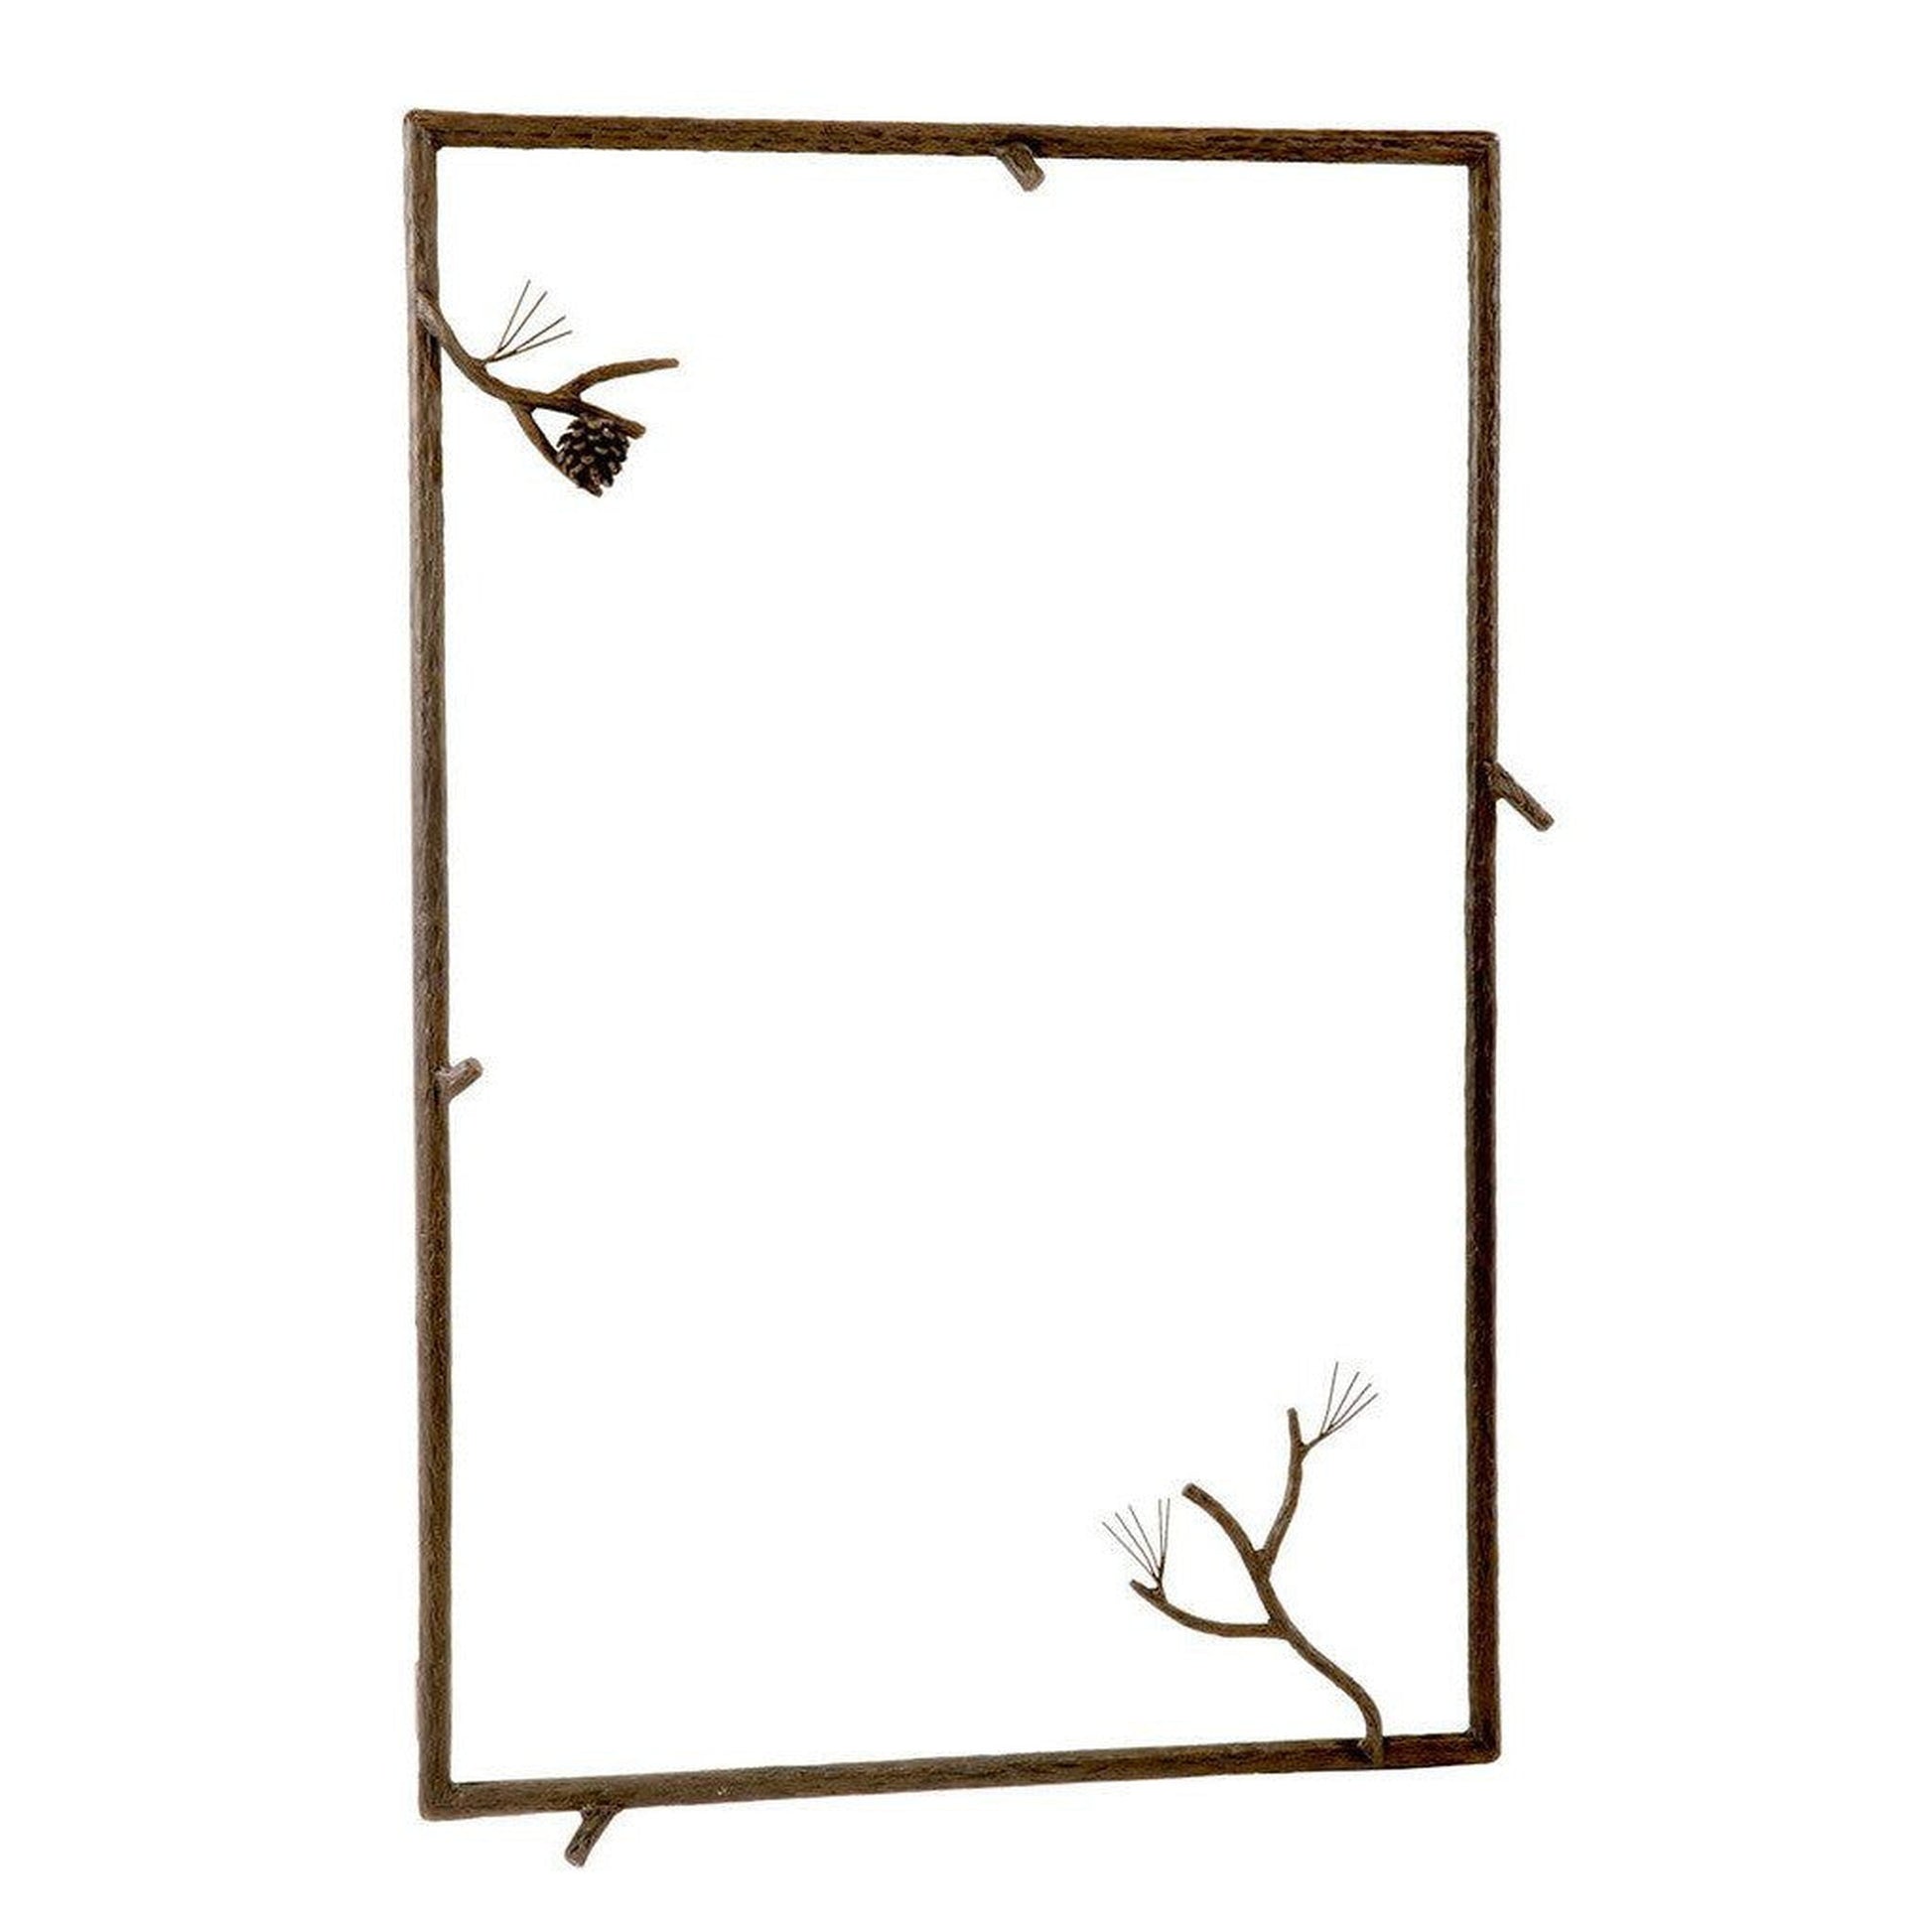 Stone County Ironworks Pine 25" x 21" Small Burnished Gold Iron Wall Mirror With Copper Iron Accent